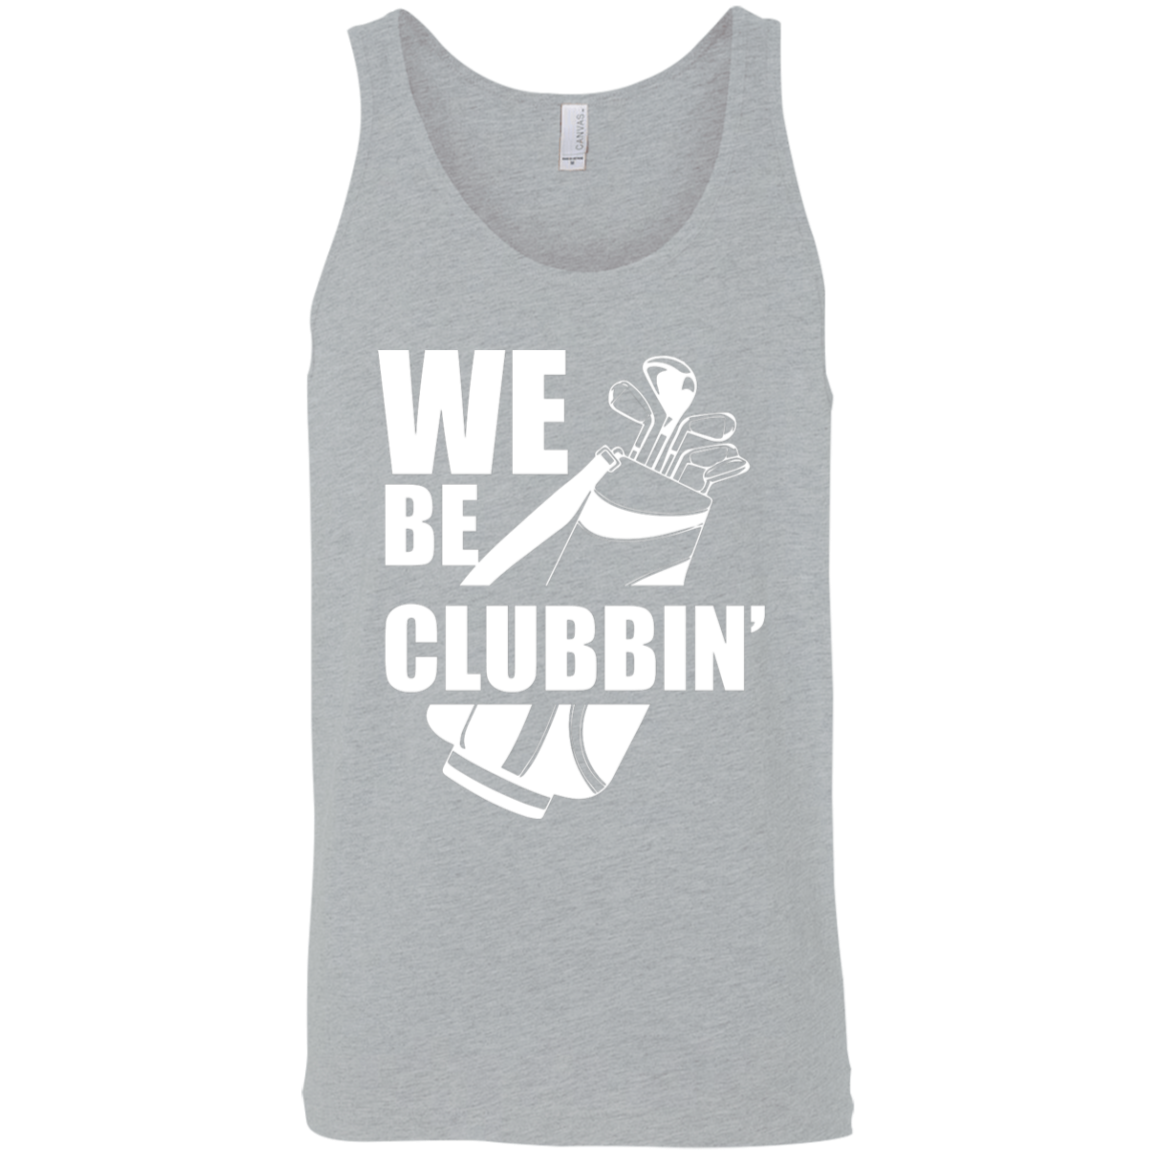 We Be Clubbin' Tank Top Apparel - The Beer Lodge